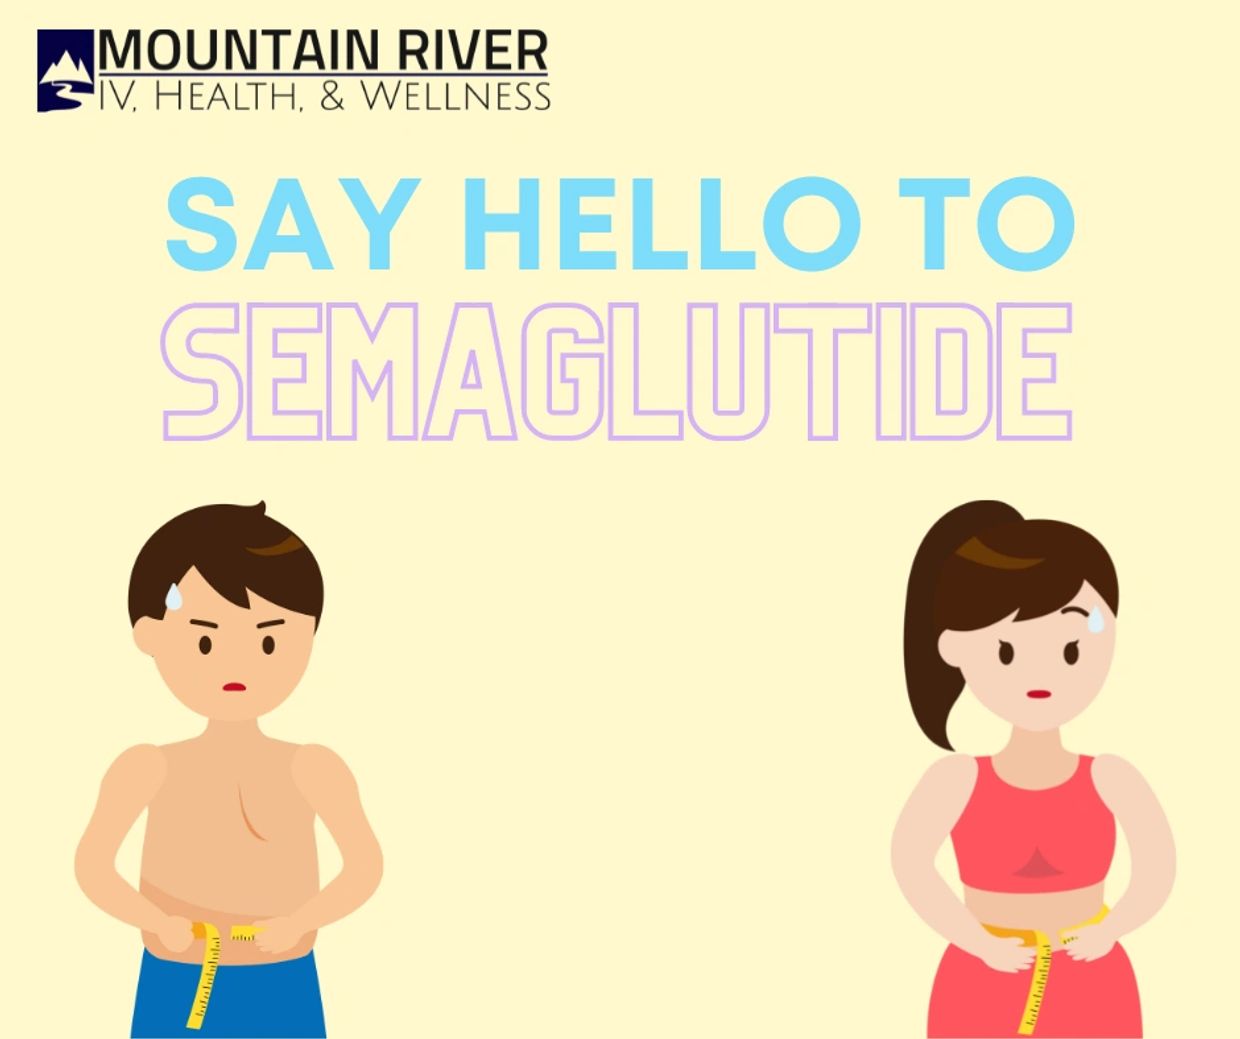 Semaglutide has been approved by the FDA for weight loss. Call (208) 528-6749 for Semaglutide. 